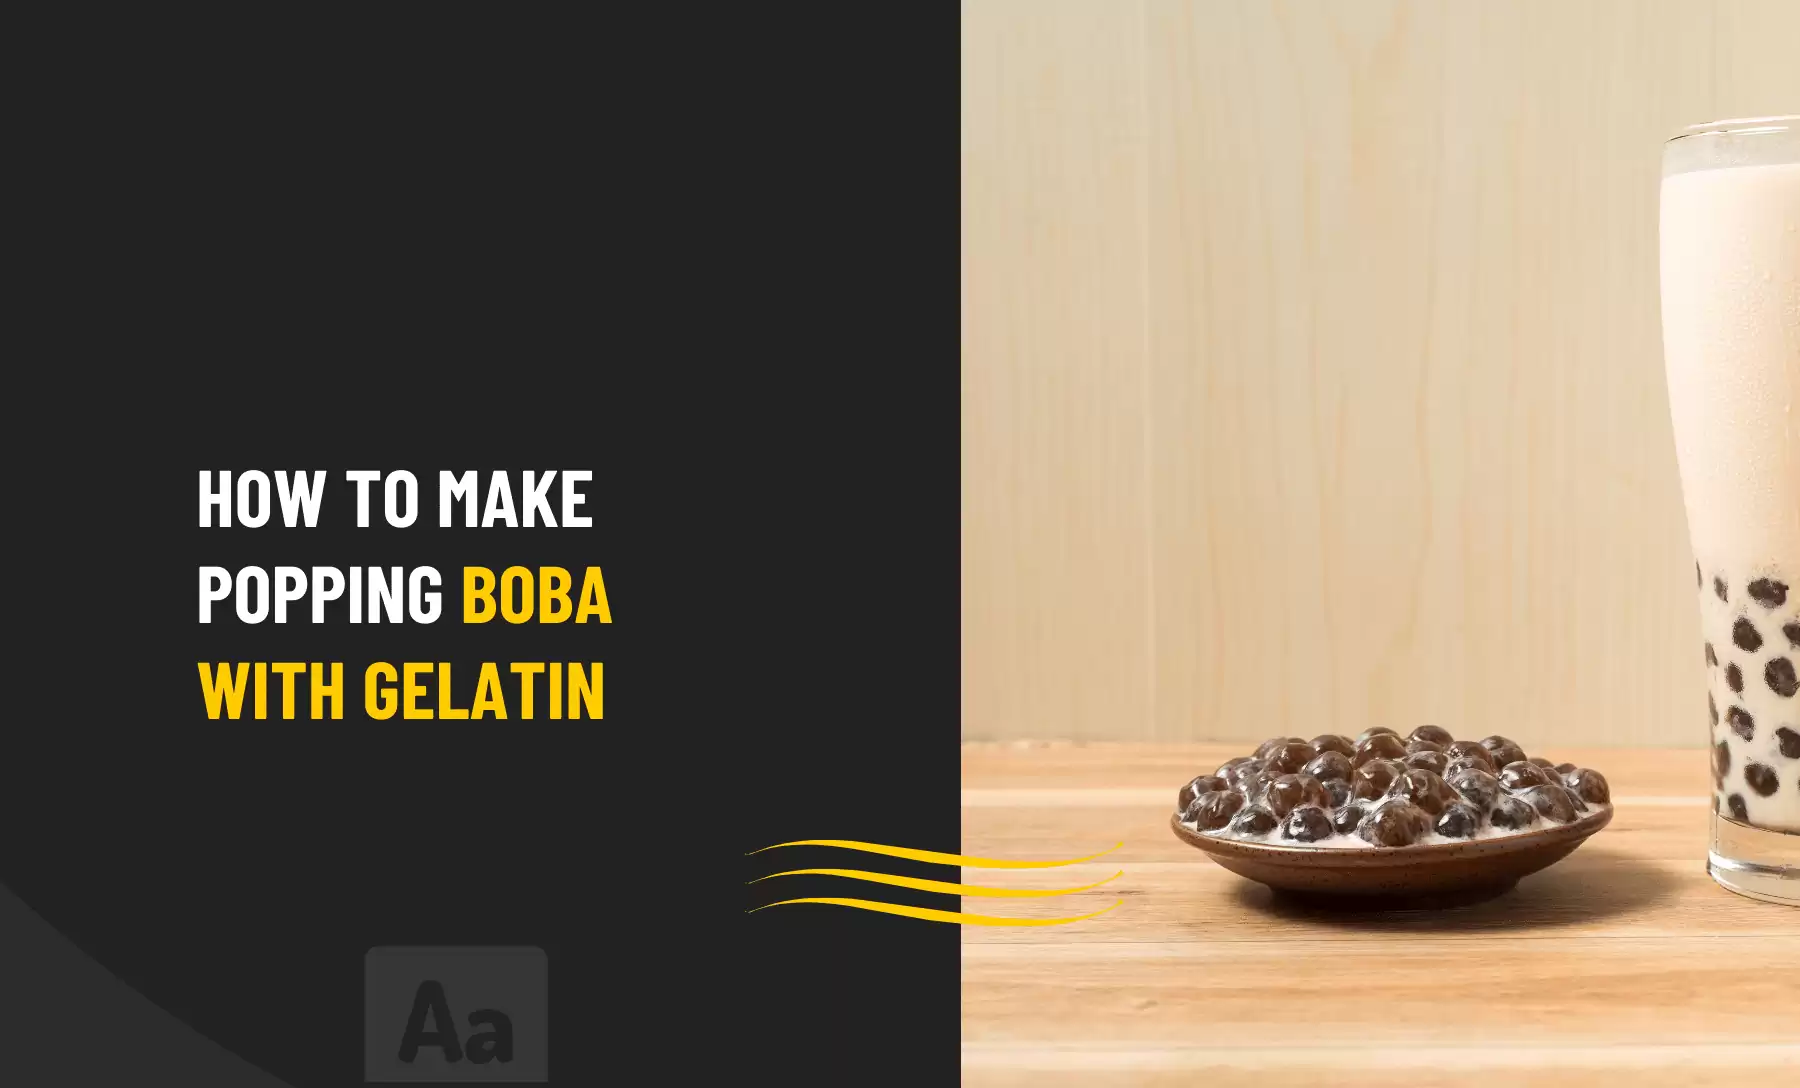 How to make popping boba with gelatin